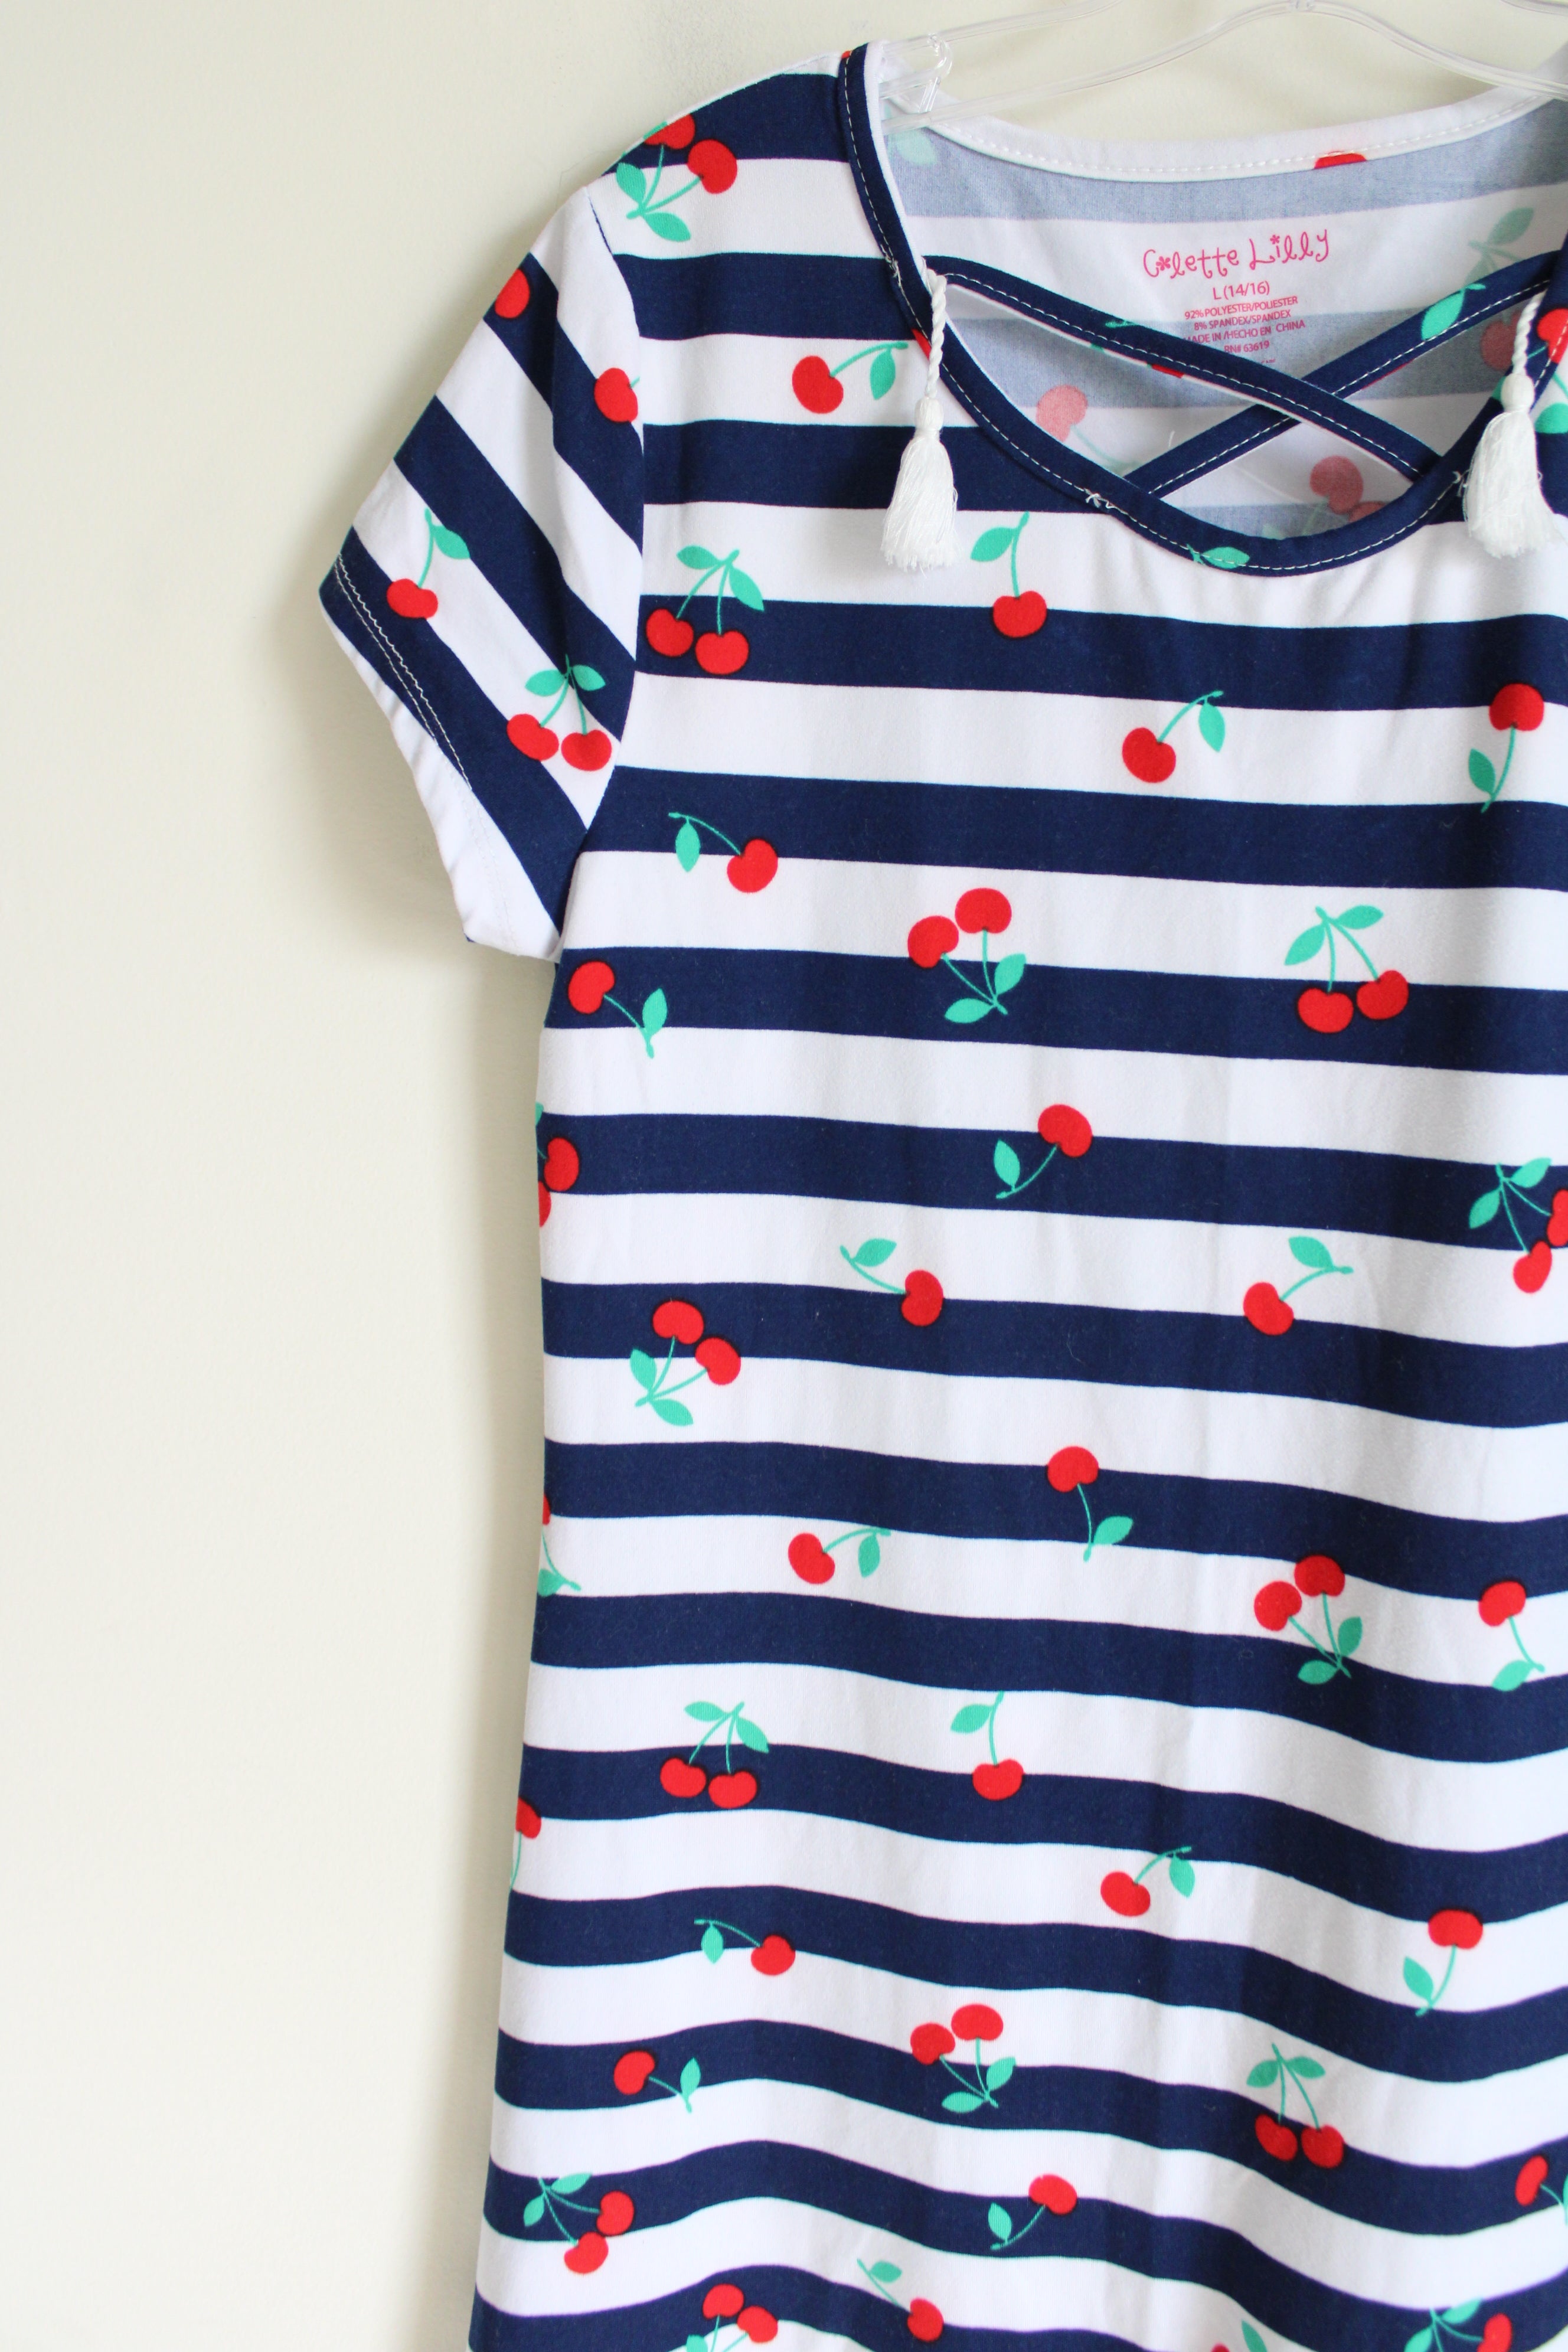 Colette Lilly Blue & White Striped Cherry Dress | 14/16